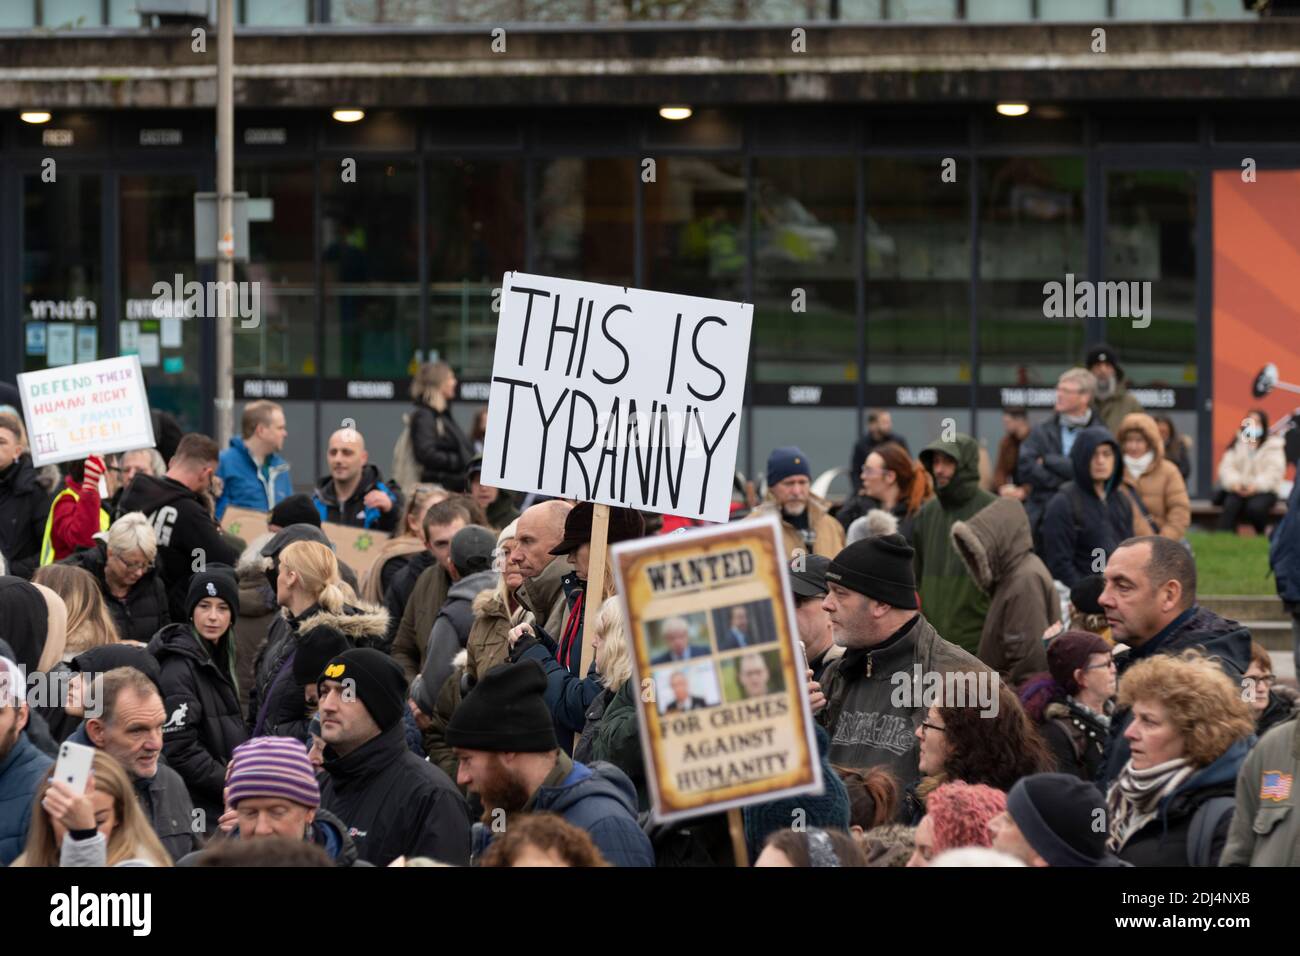 Manchester, UK. 12/12/2020:Around 1,000+ people gathered in Piccadilly, Manchester to protest against loss of freedoms due to governments reaction to corona virus Stock Photo